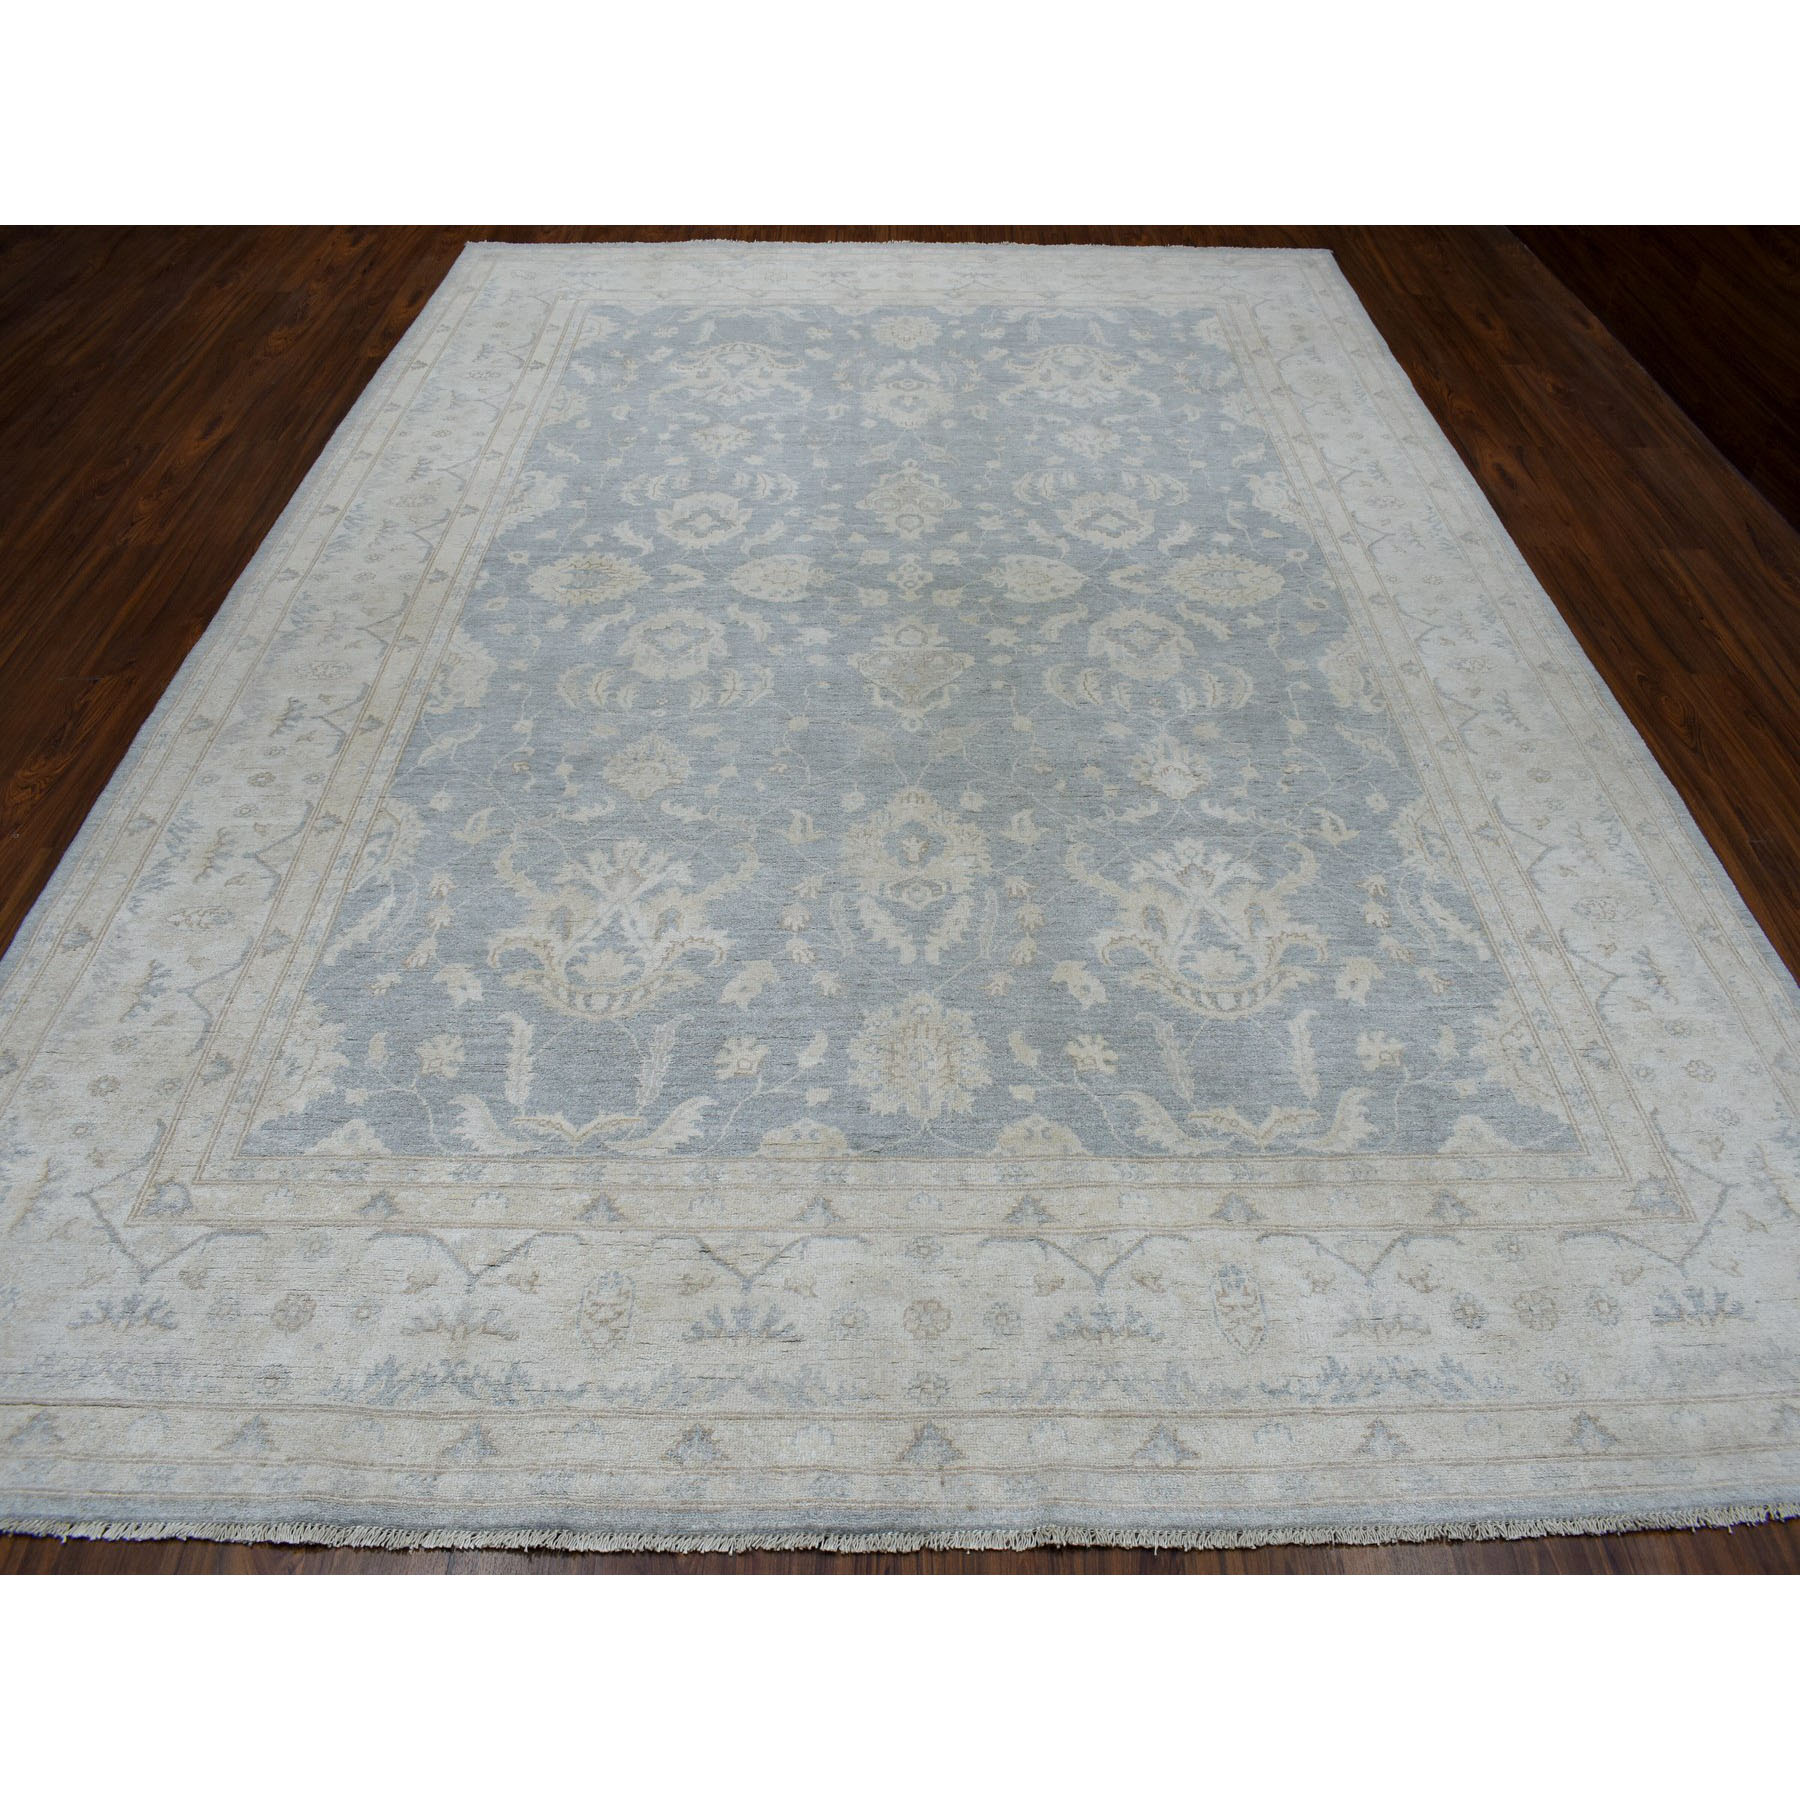 8-9 x12- White Wash Peshawar Pure Wool Hand-Knotted Oriental Rug 